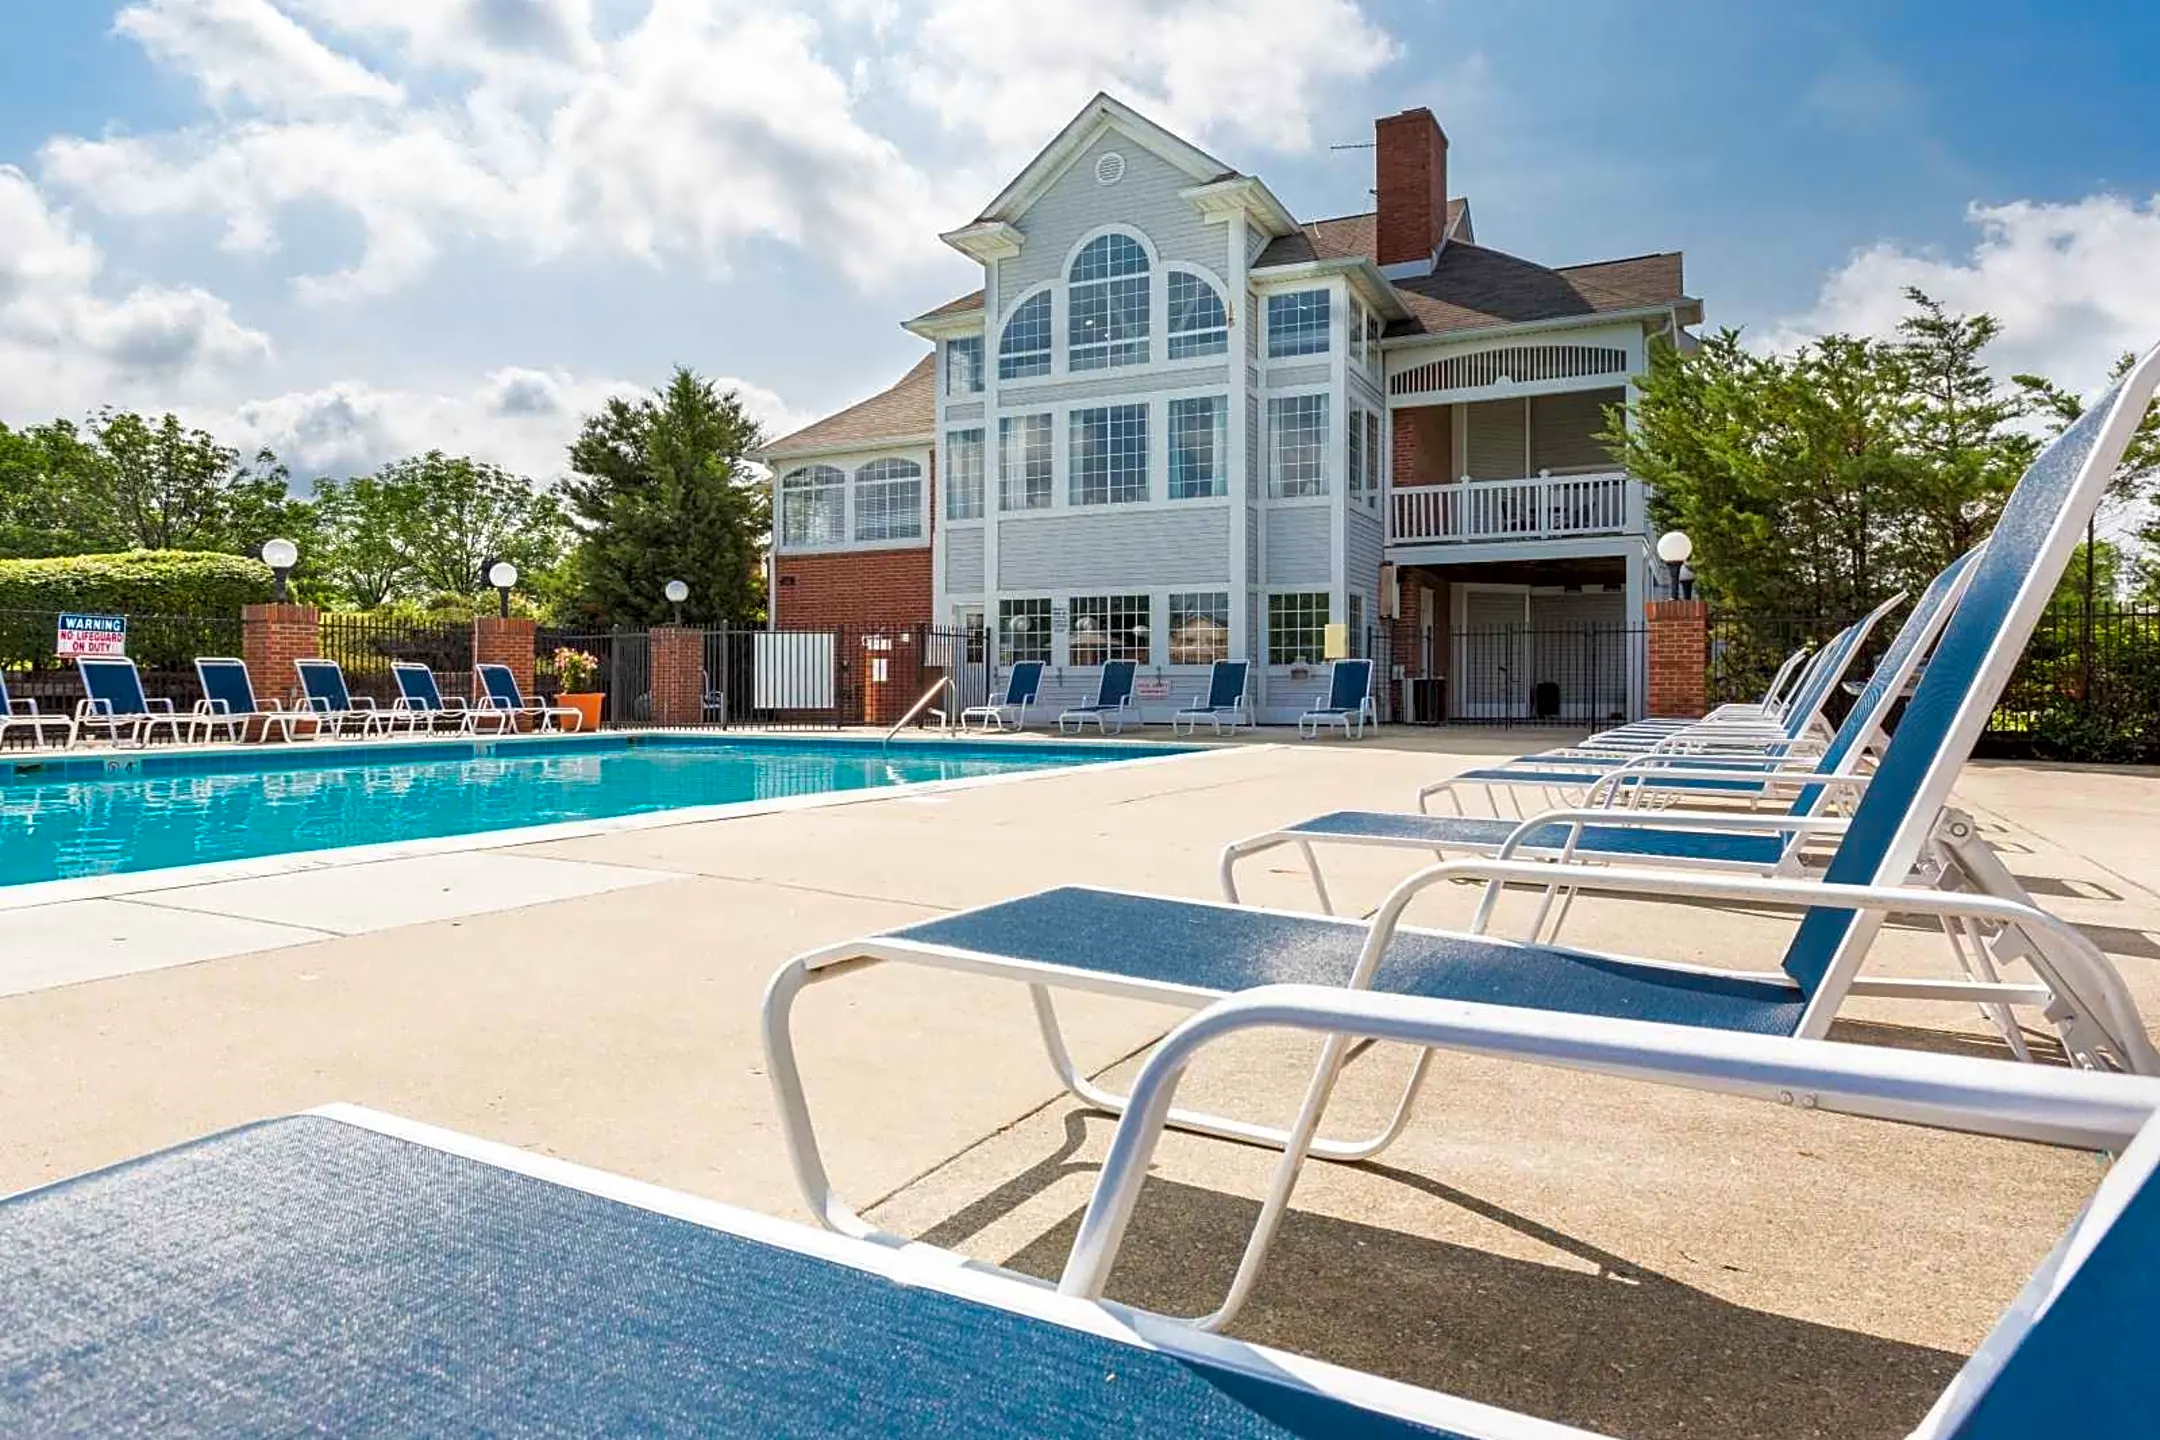 Pool - Sundance Apartments - Indianapolis, IN